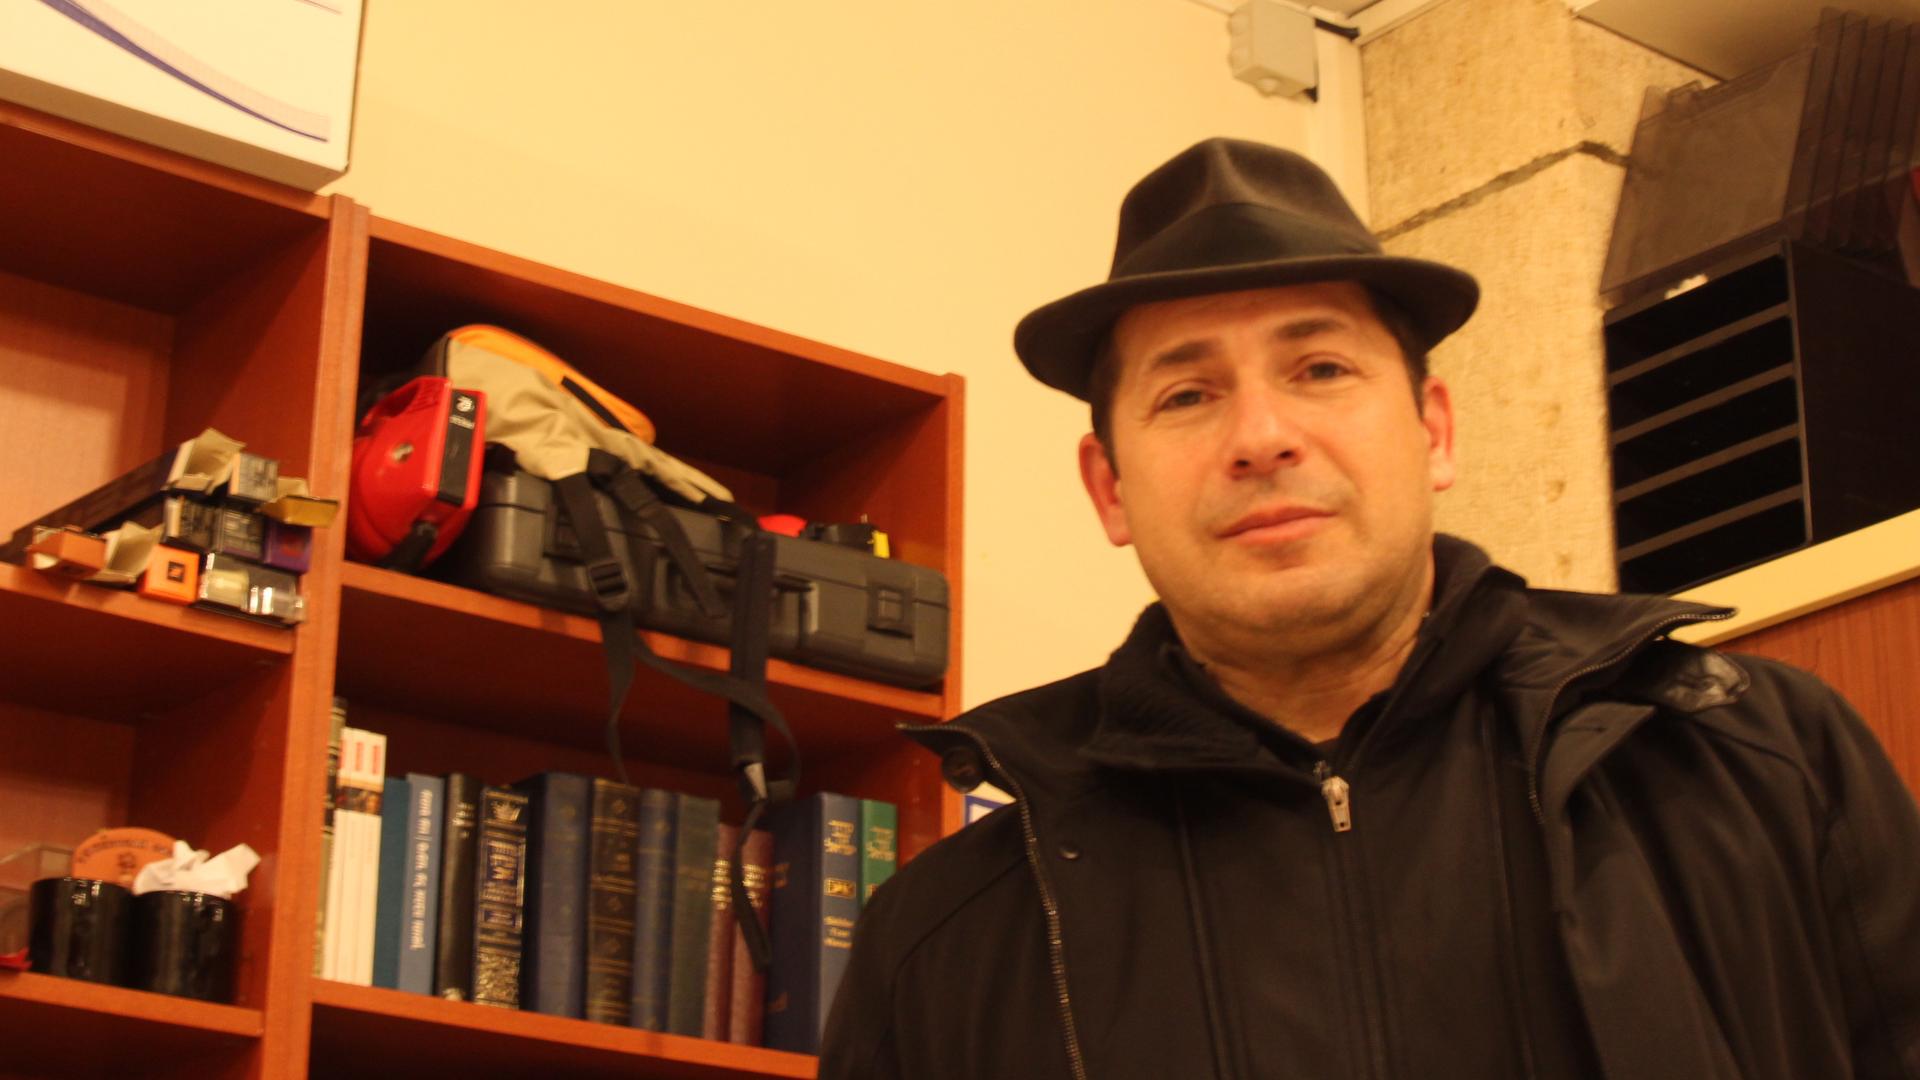 Rabbi Tom Cohen says right after the attacks on Charlie Hebdo and the Hypercasher kosher market 